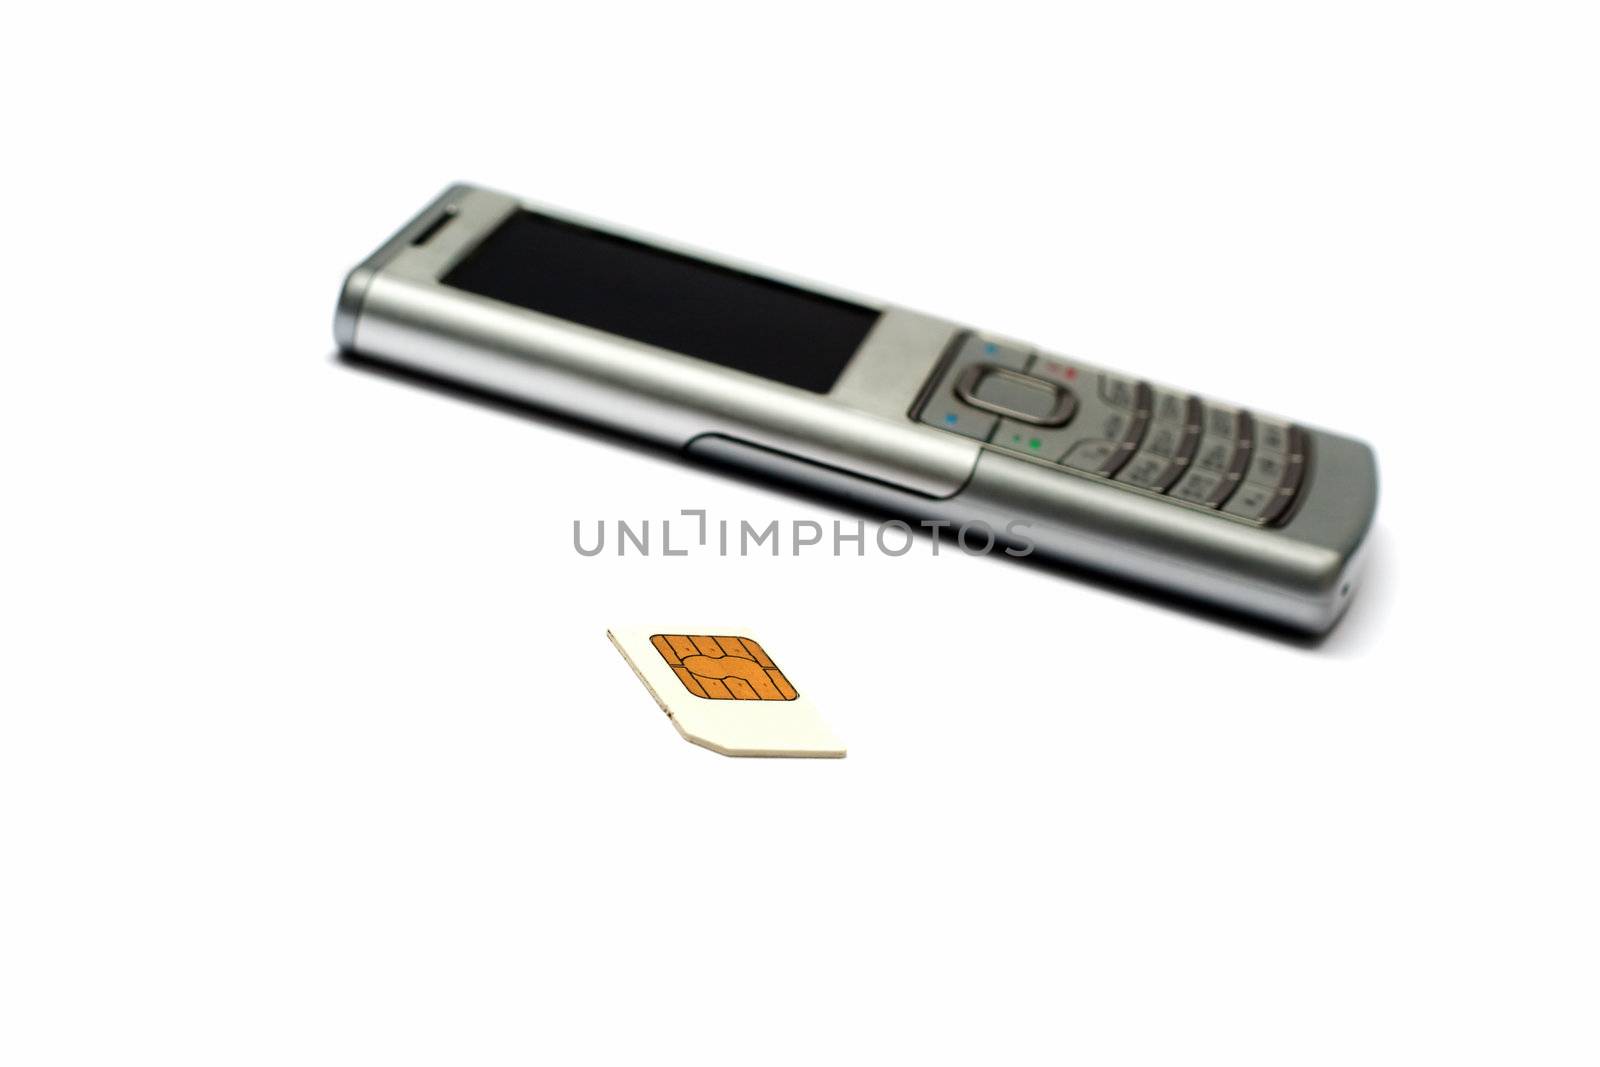 Phone and SIM card on a white background